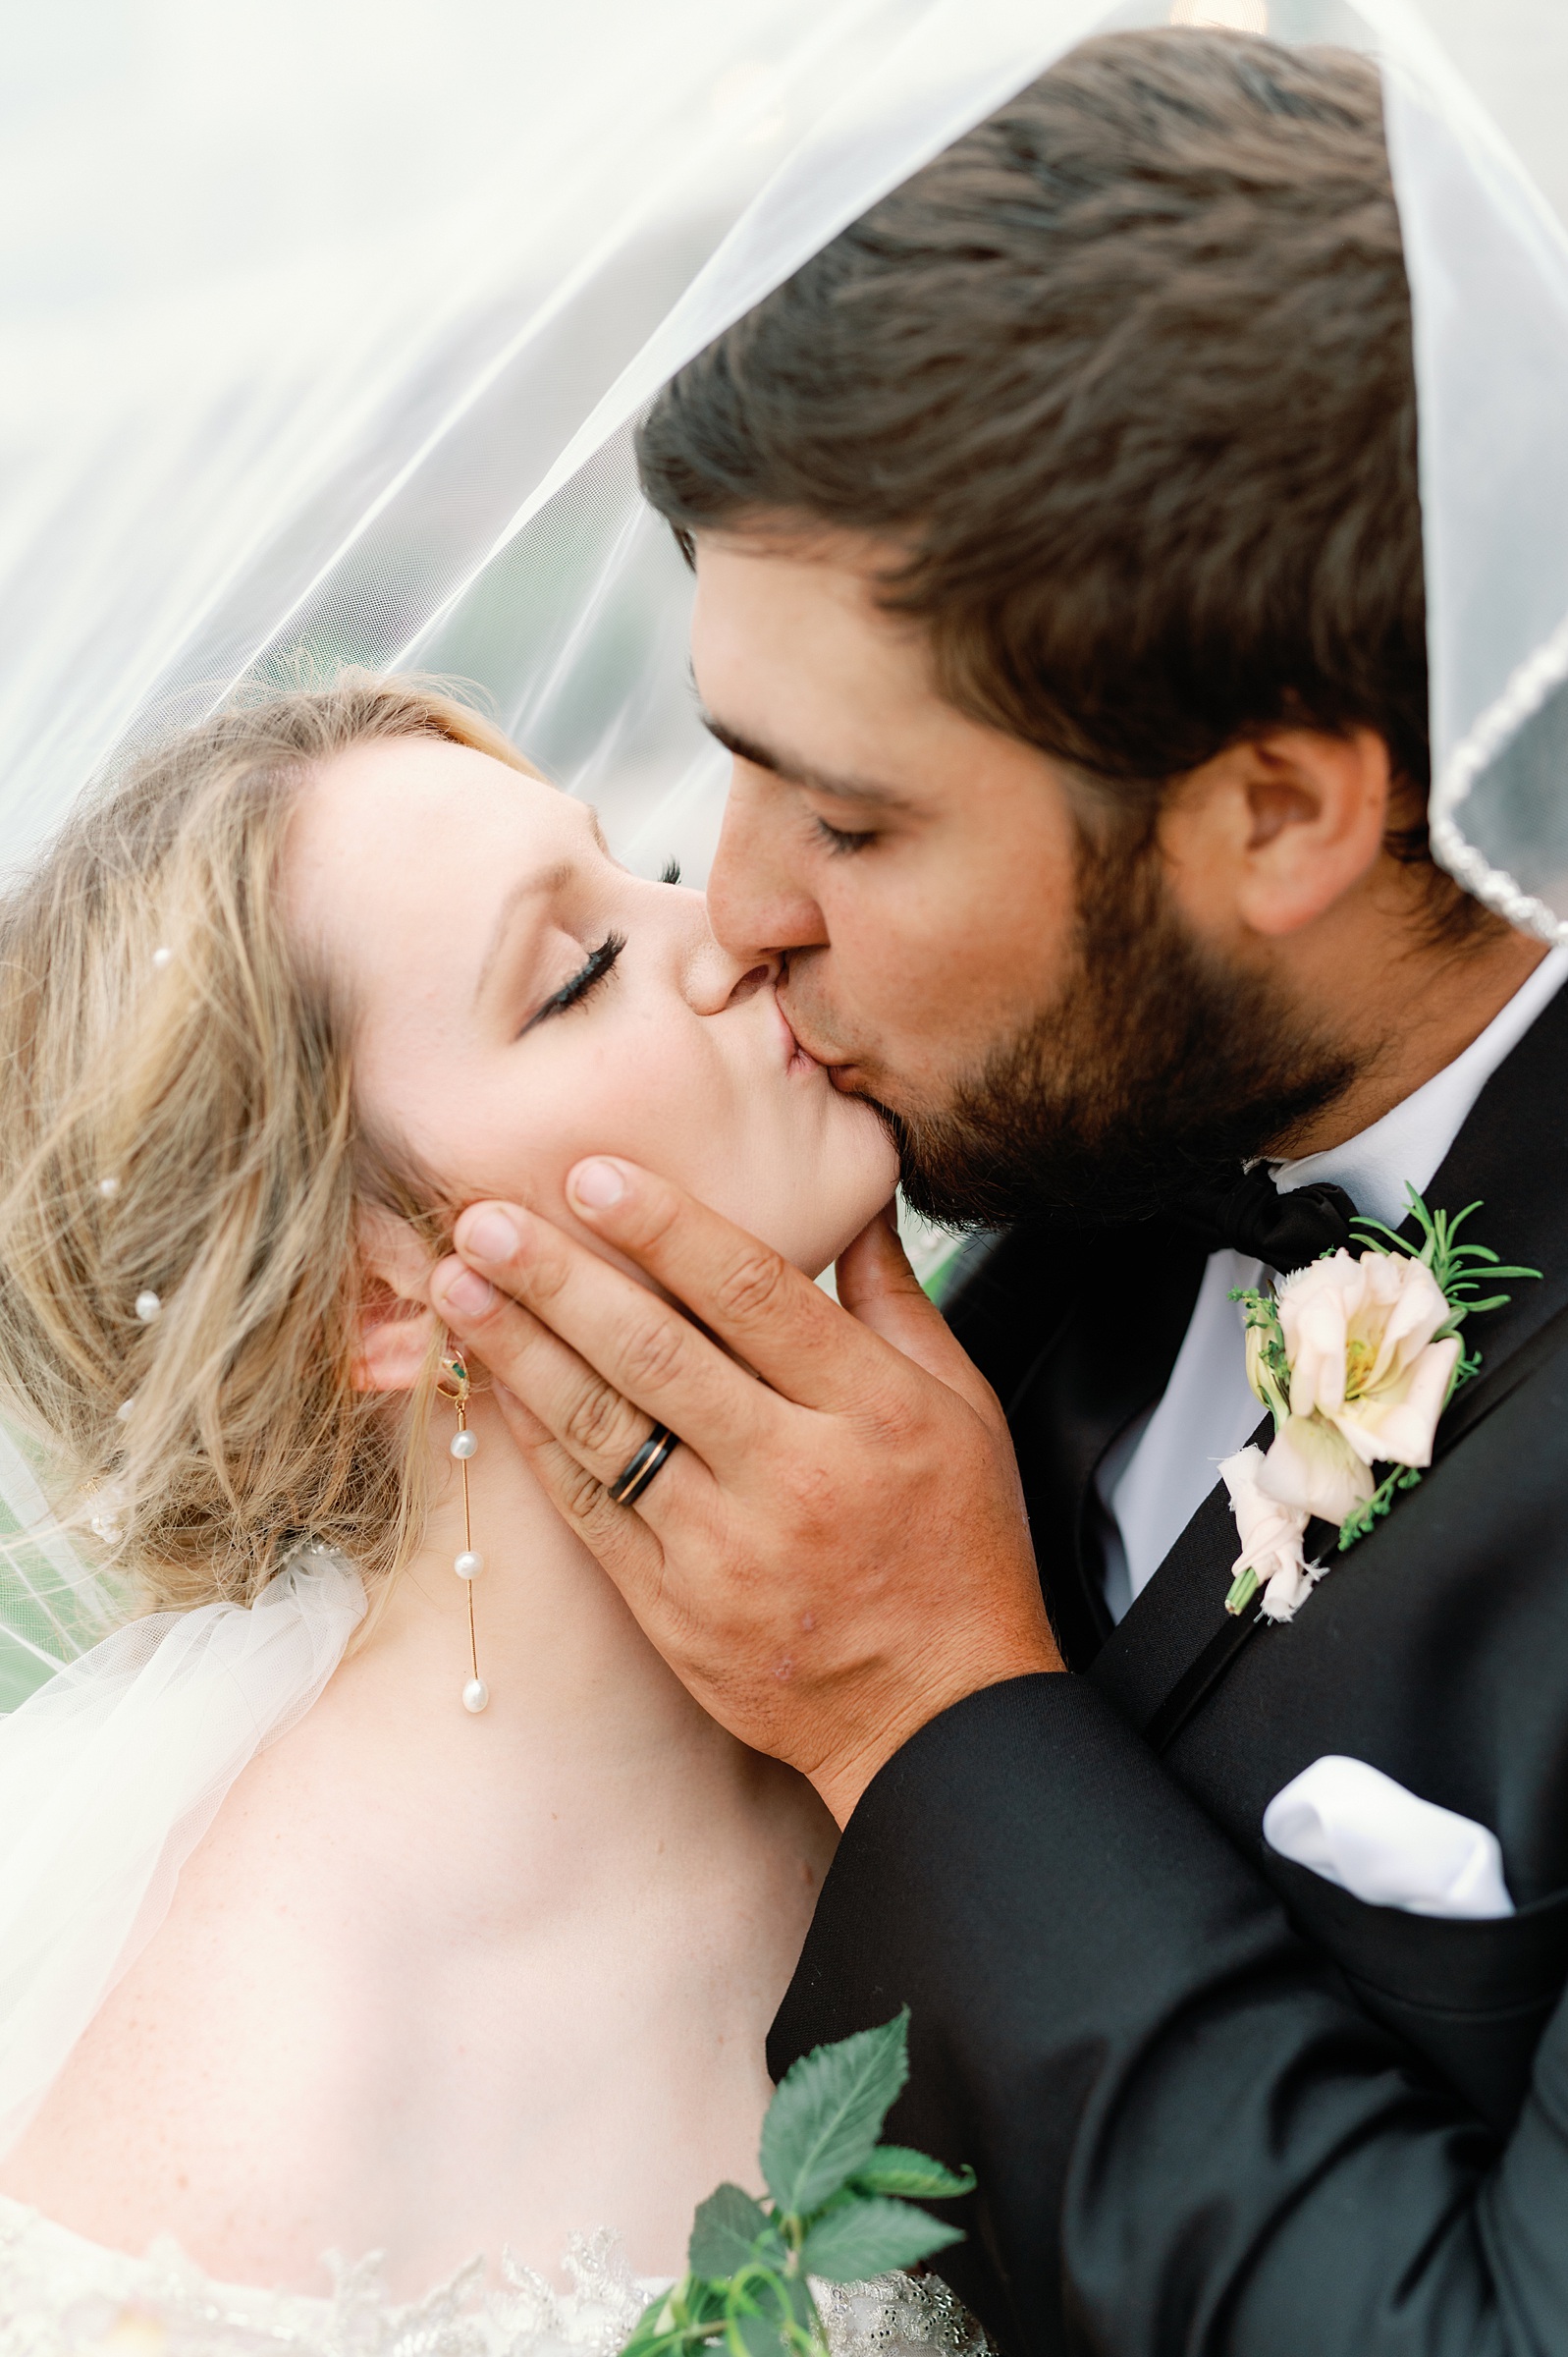 Couple kissing on their wedding day, groom holding bride by the chin under the veil.